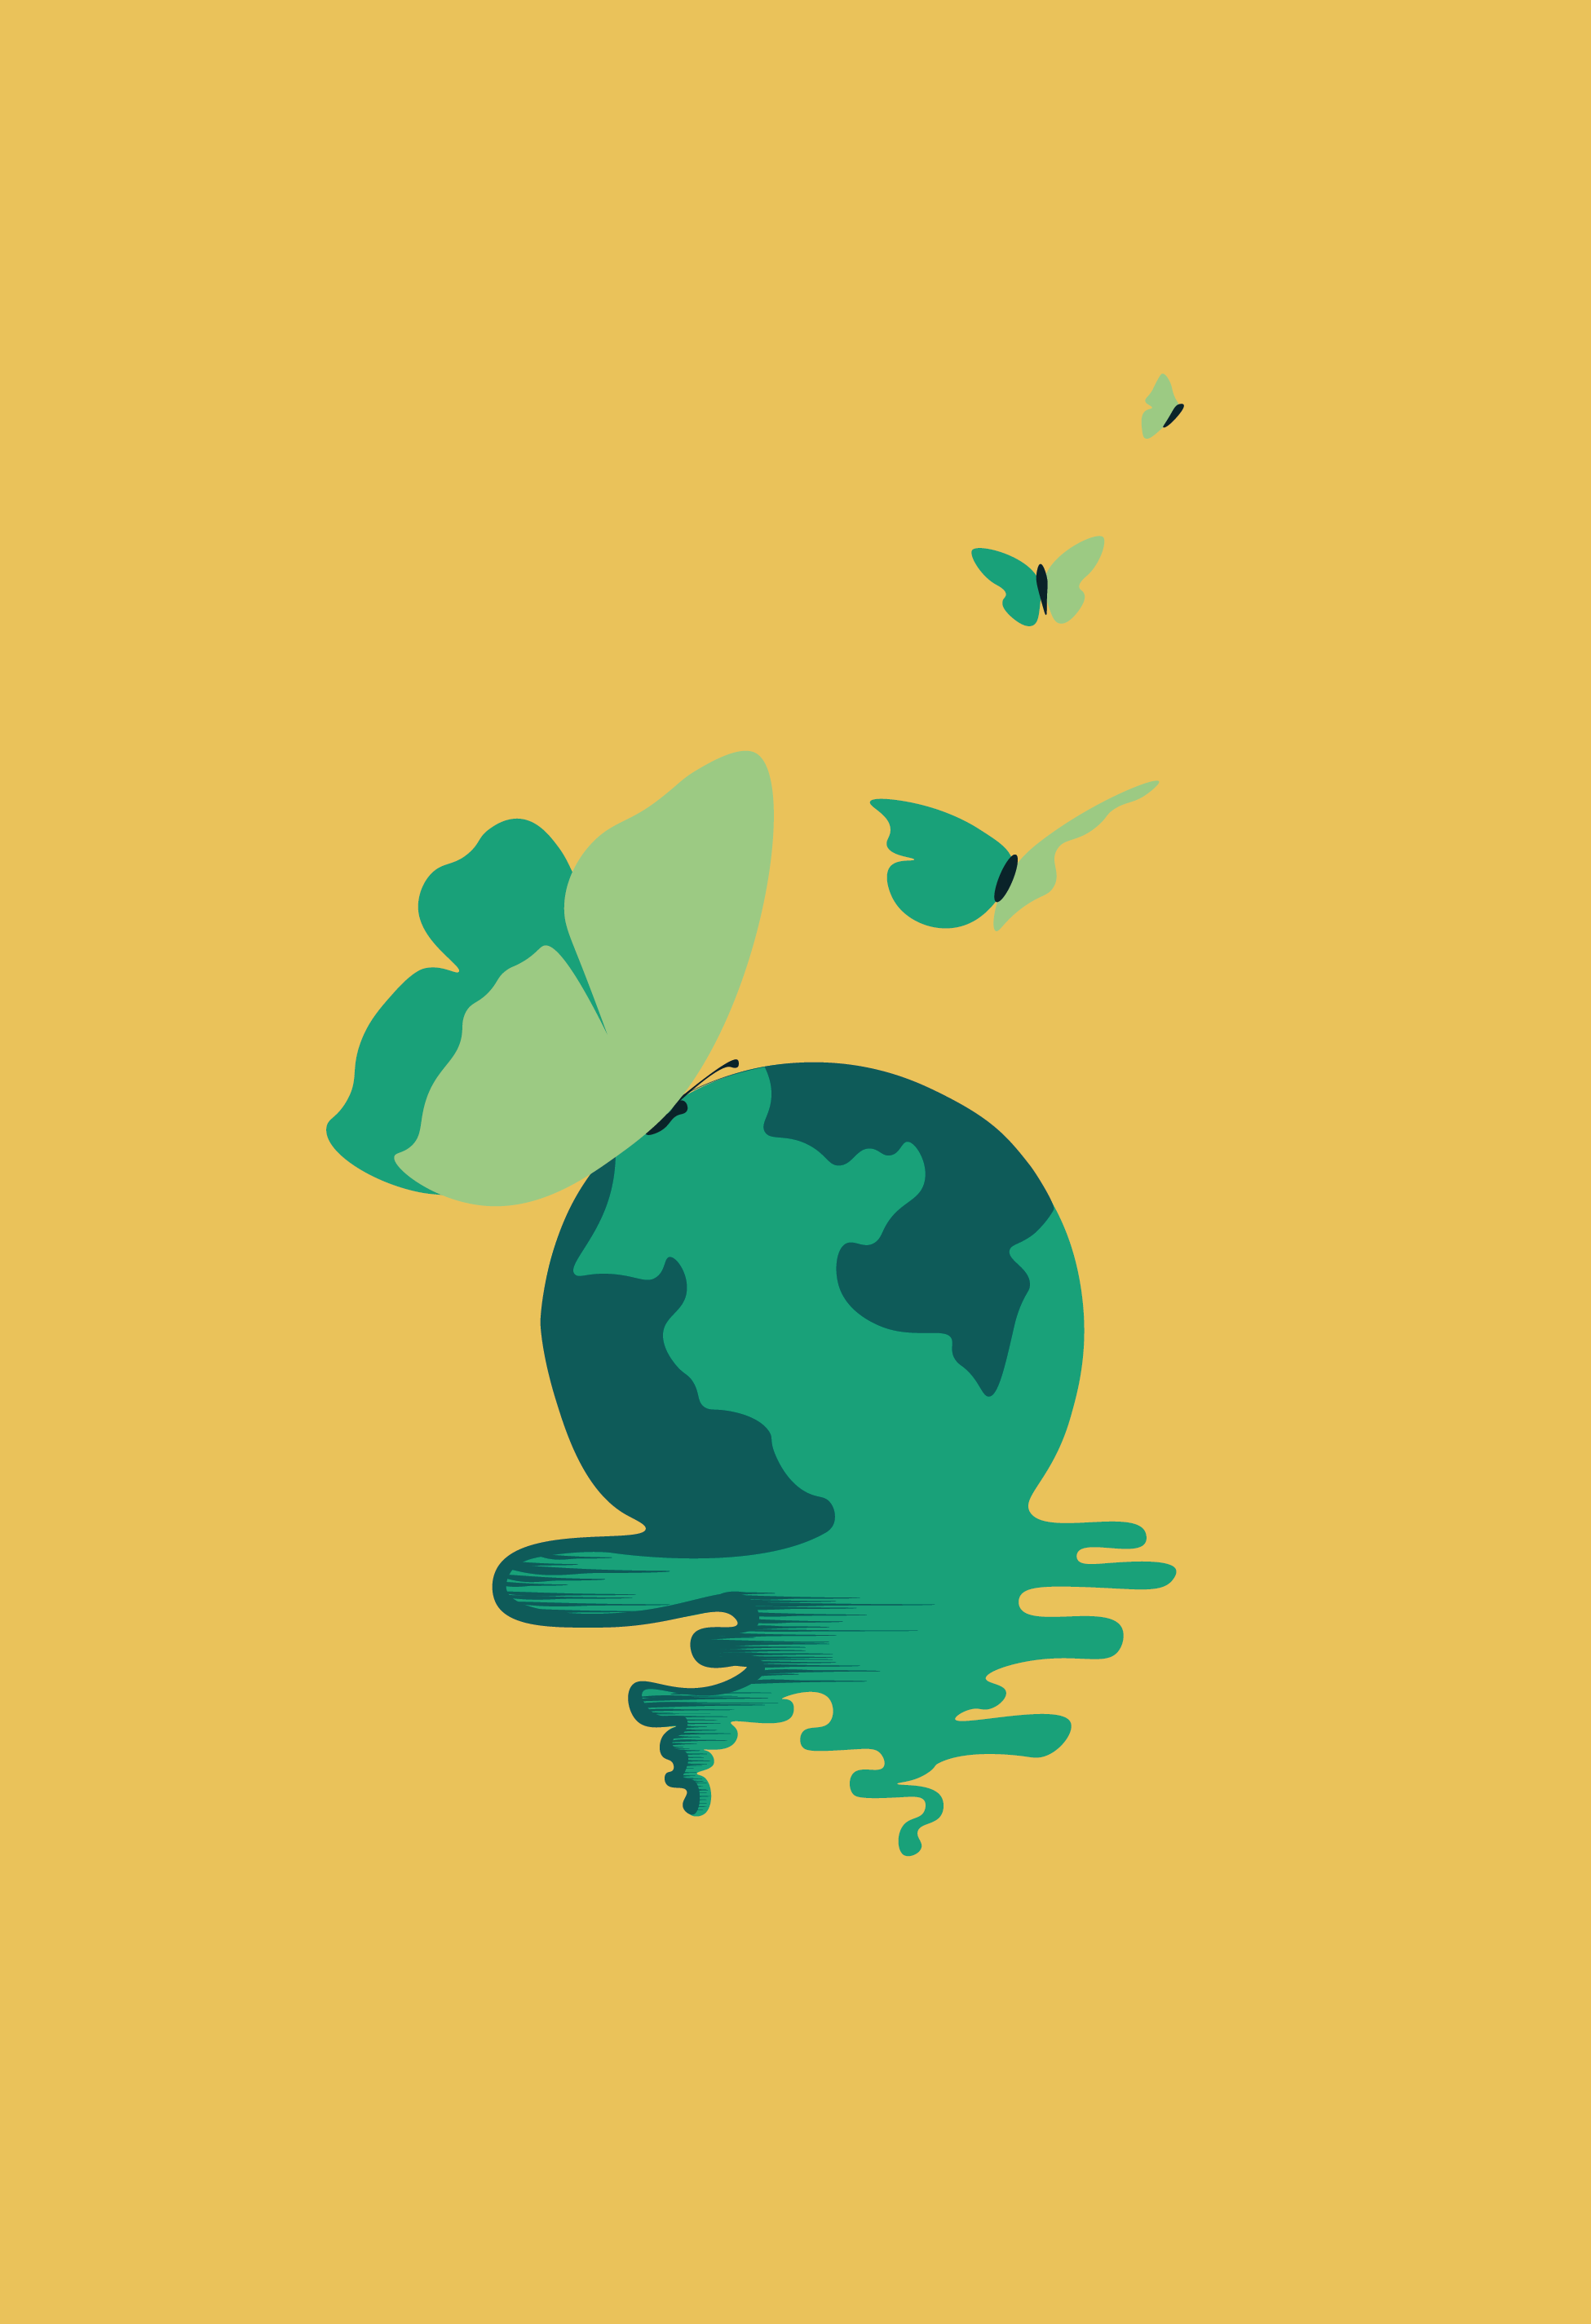 Stylized melting earth with butterflies around it